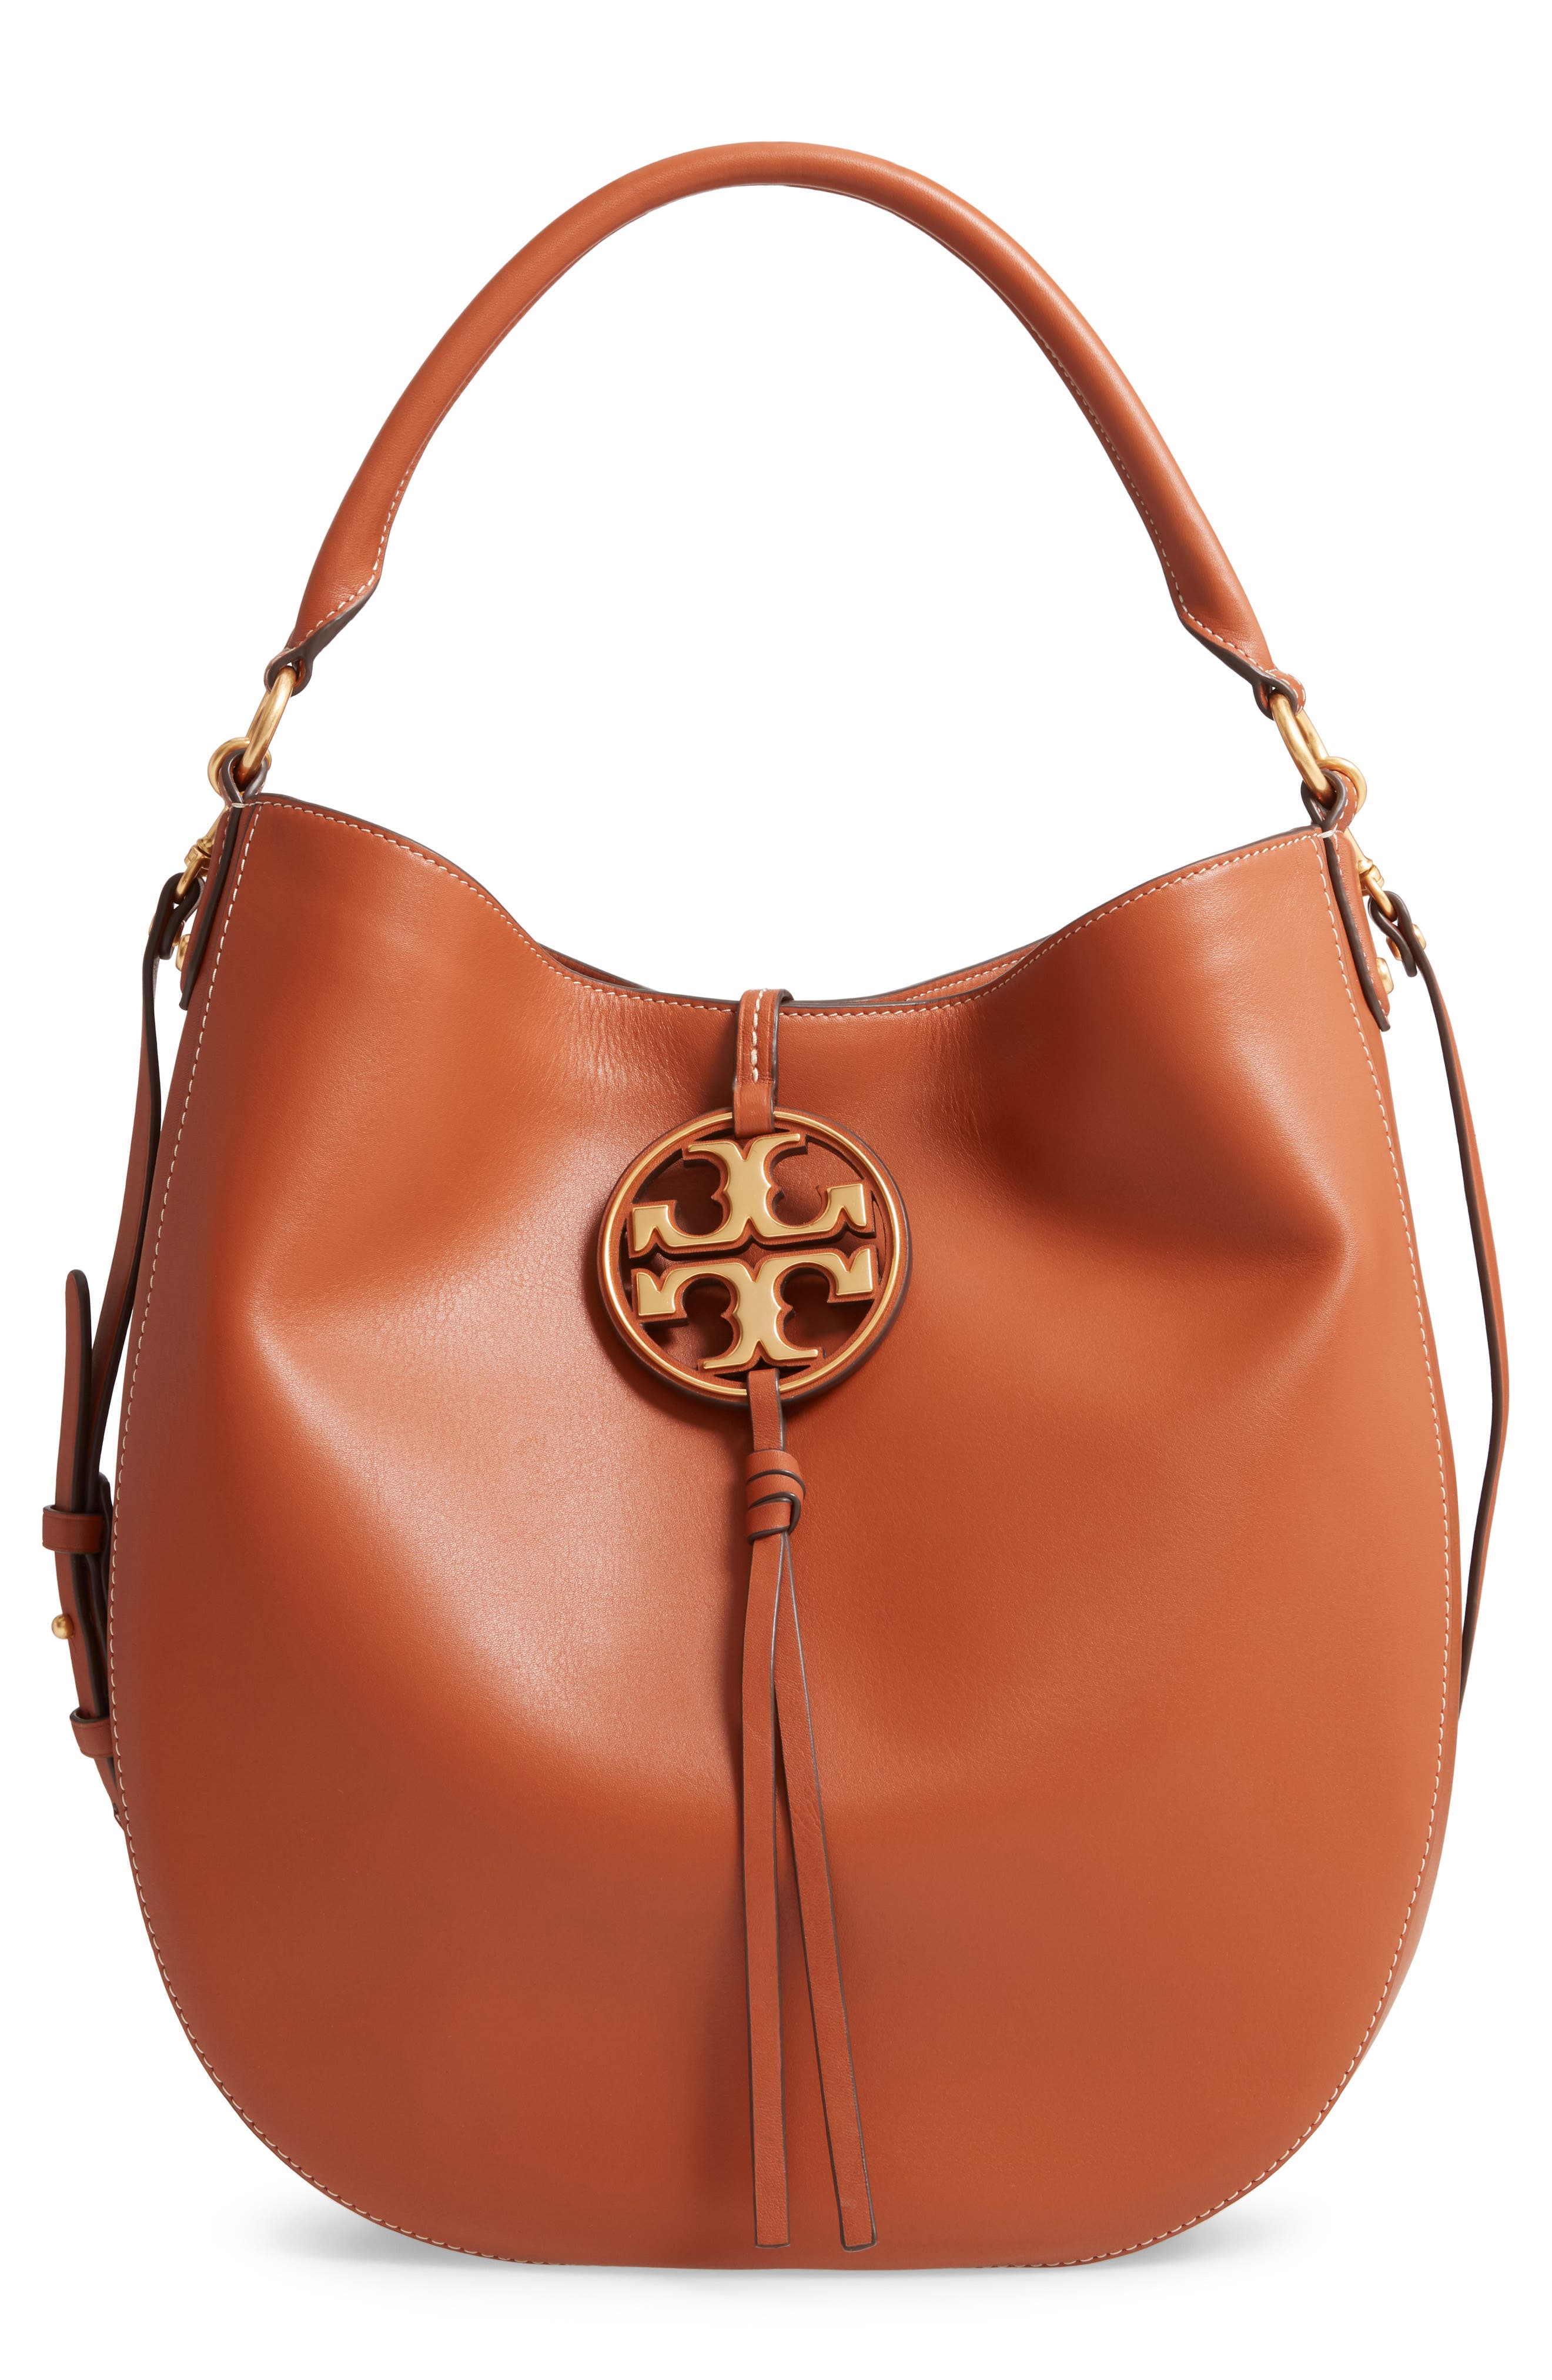 tory burch miller leather hobo